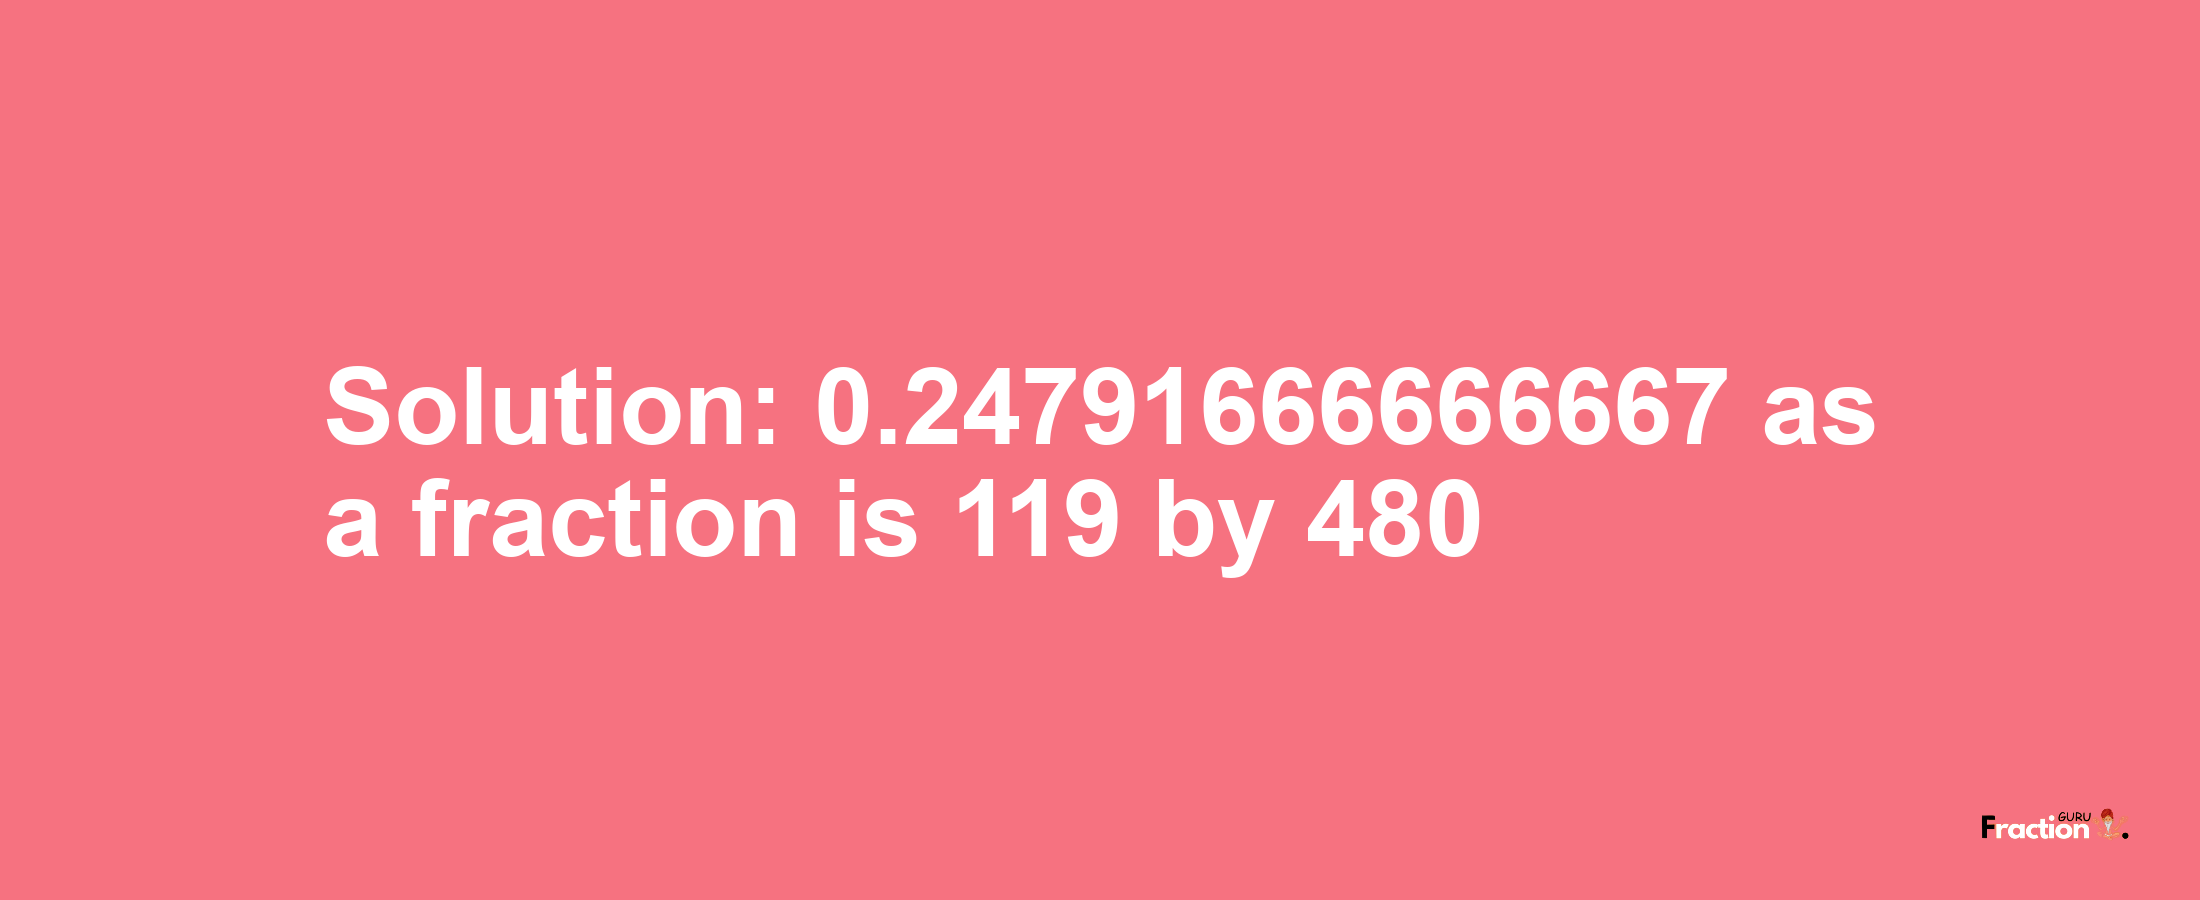 Solution:0.24791666666667 as a fraction is 119/480